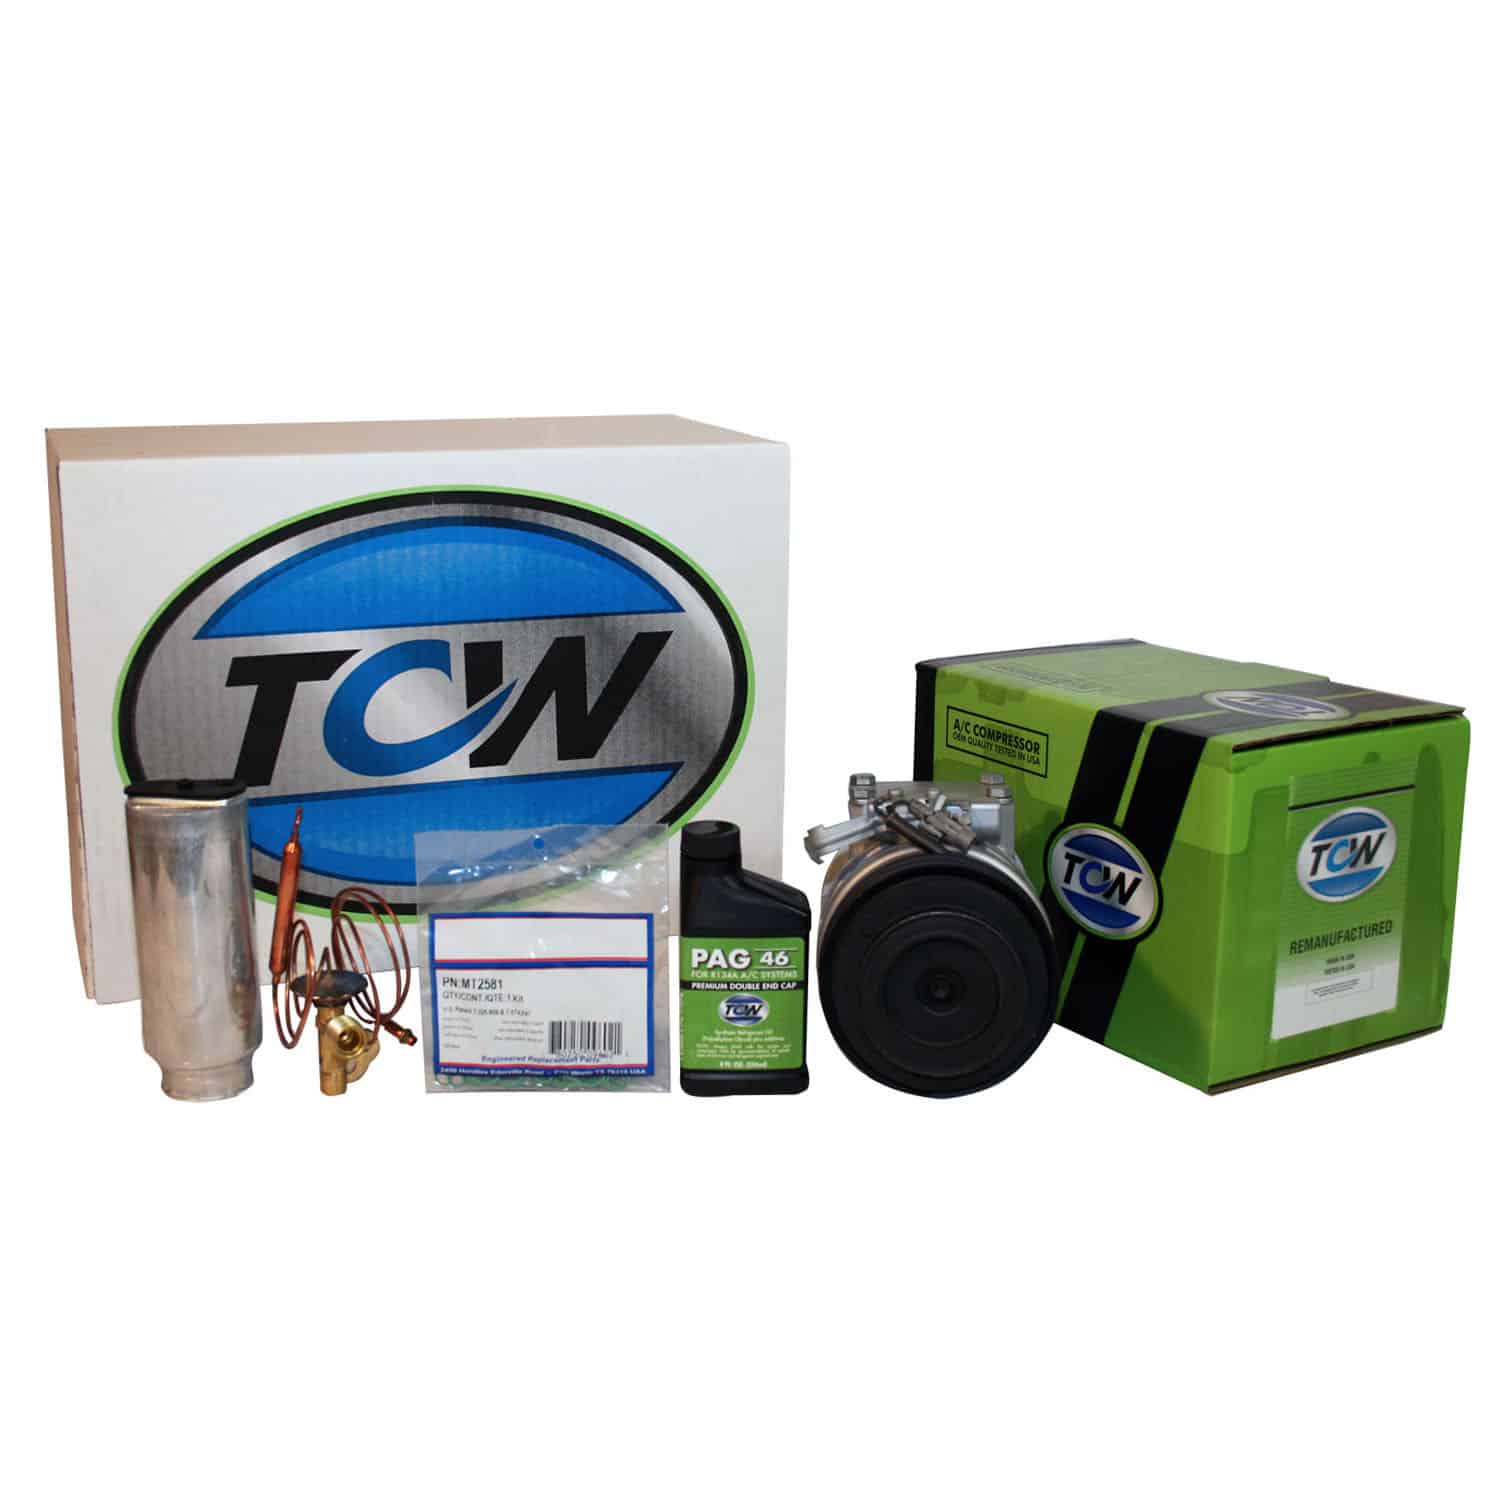 TCW Vehicle A/C Kit K1000523R Remanufactured Product Image field_60b6a13a6e67c